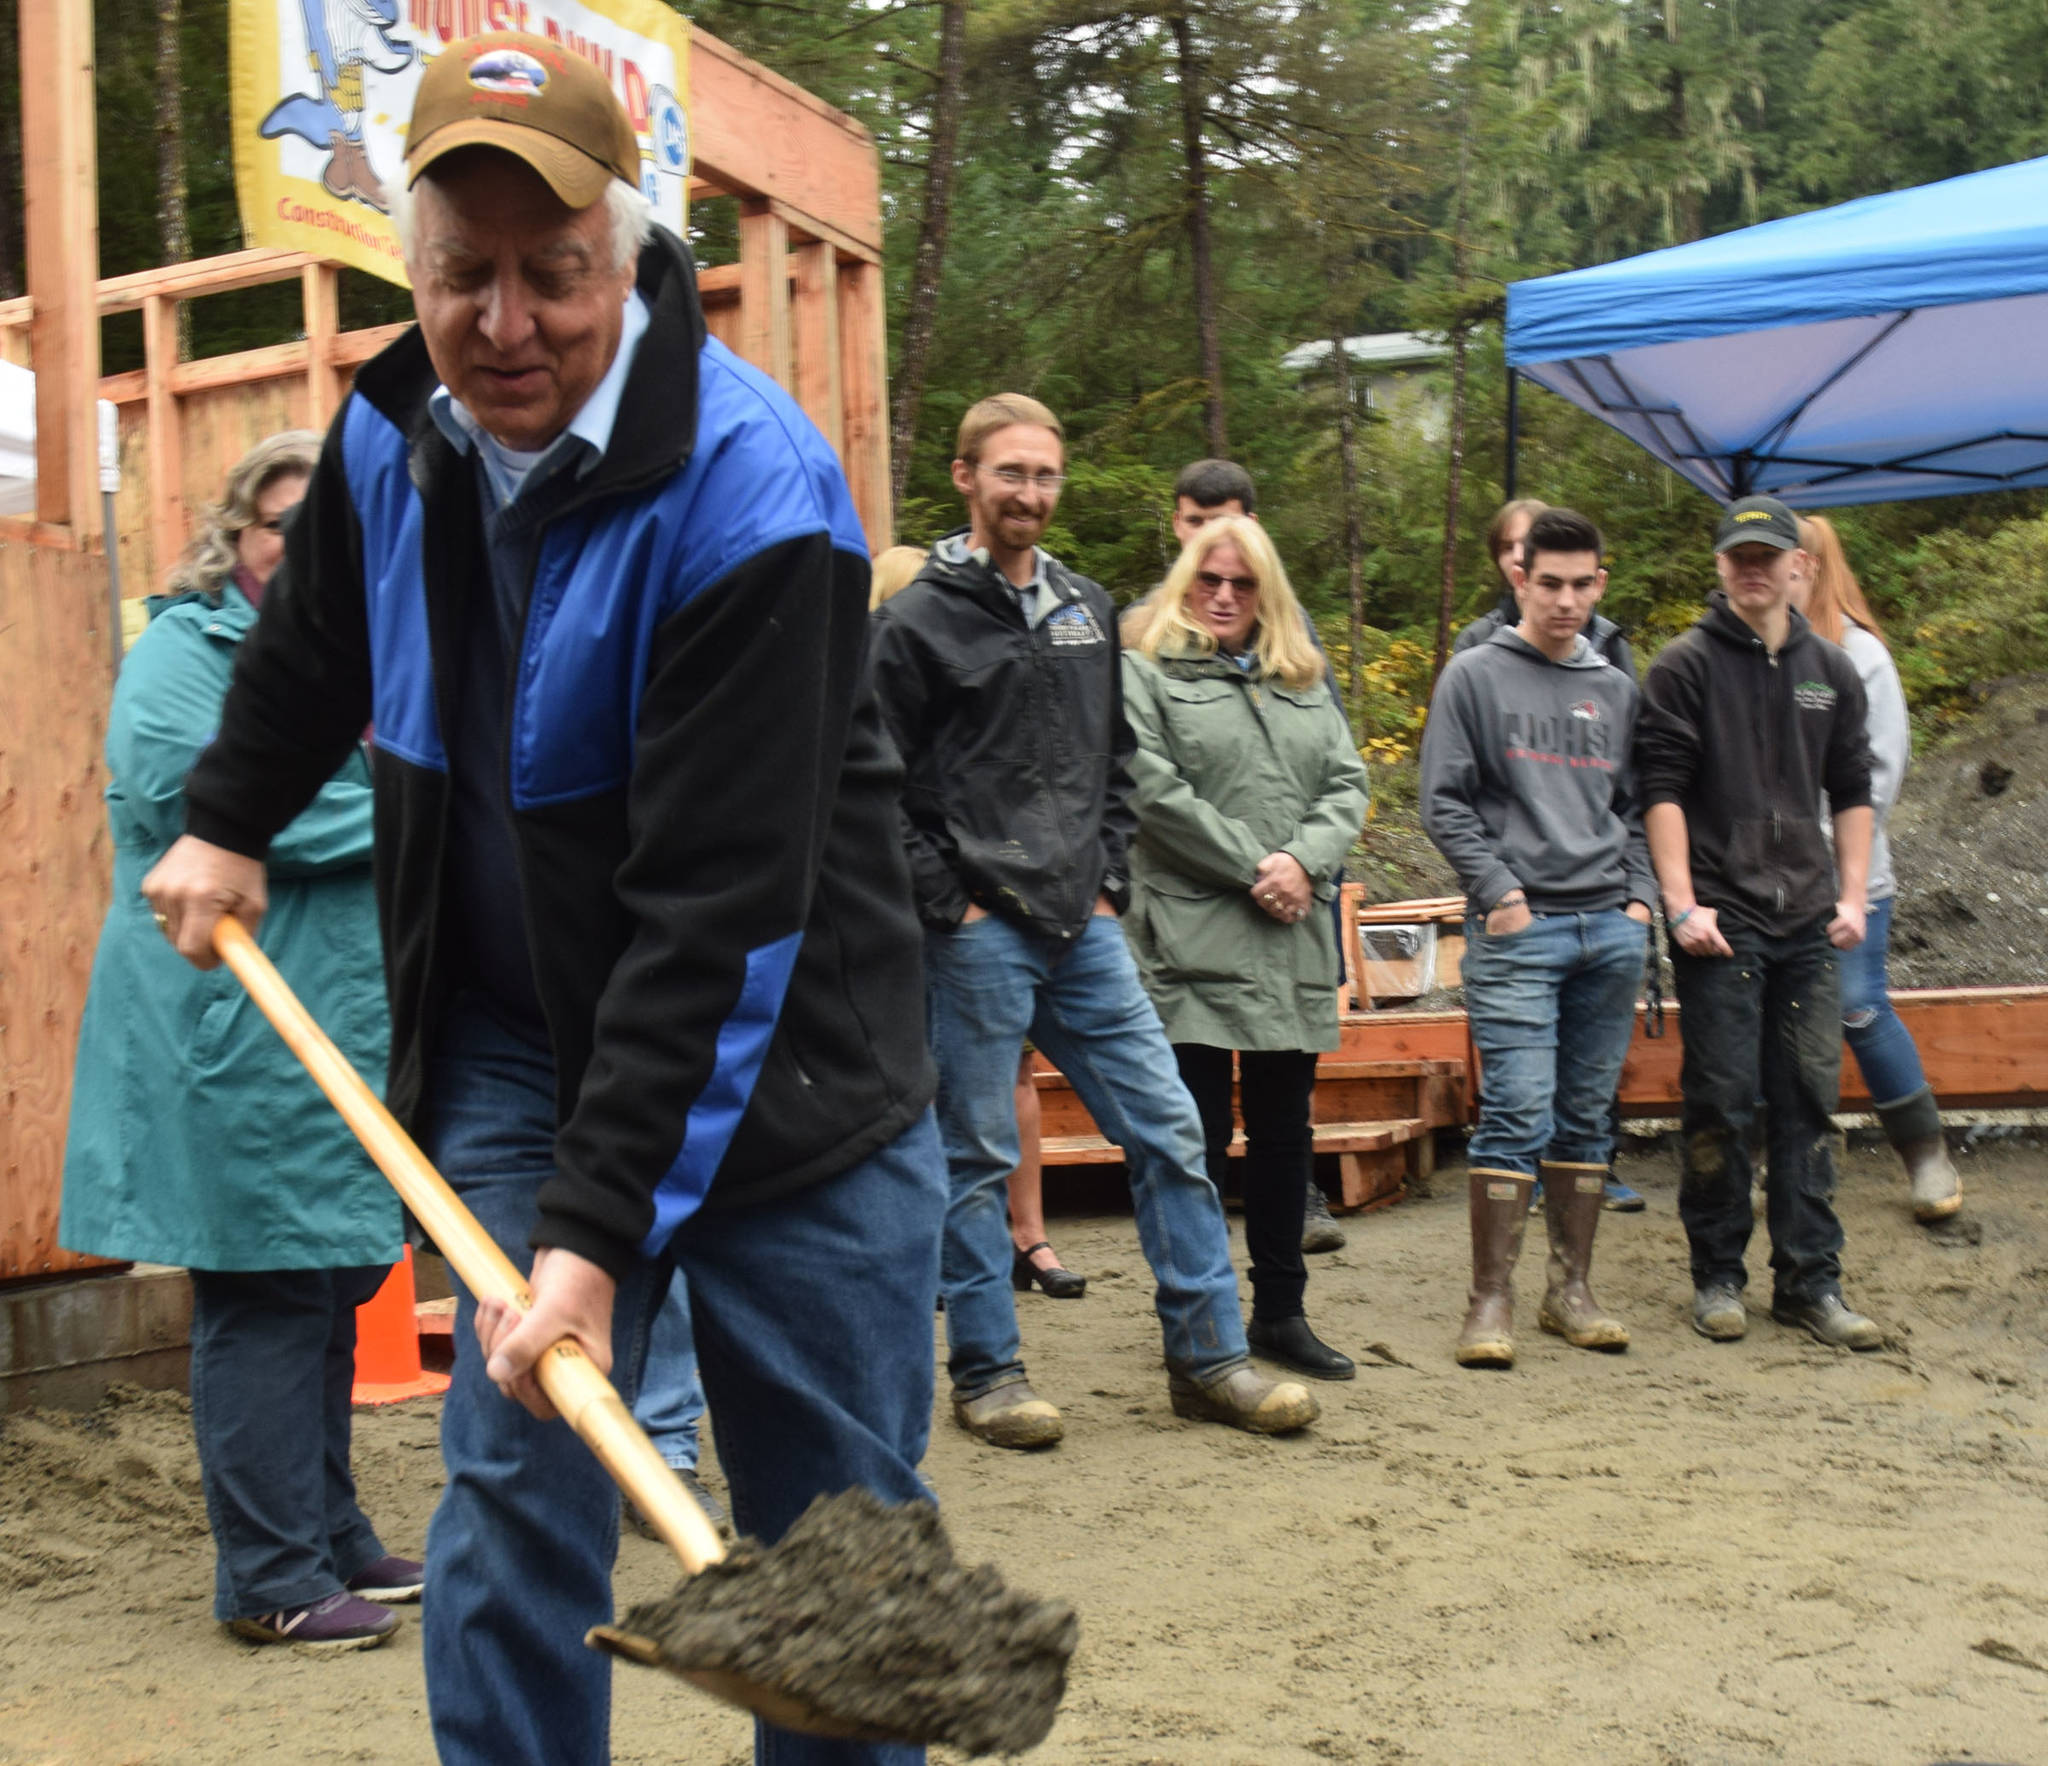 Mayor Ken Koelsch digs a shovel full of dirt at a Wednesday dedication ceremony for Jackie Street Cottages, an affordable housing project in Lemon Creek. (Kevin Gullufsen | Juneau Empire)